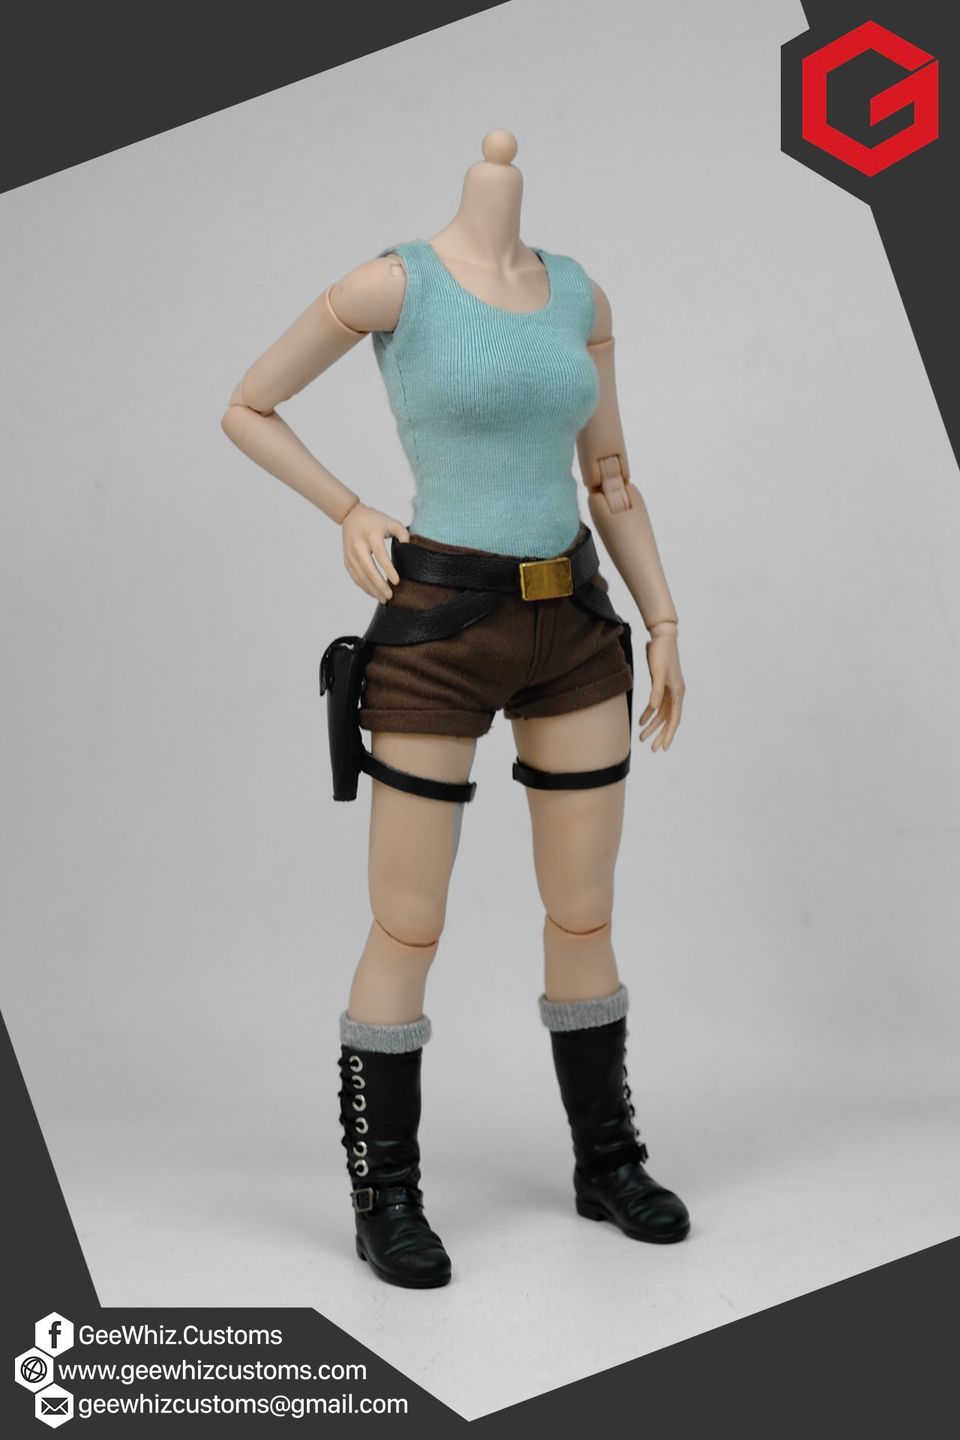 Geewhiz Customs: 1:6 Scale Lara Croft Classic Game Outfit